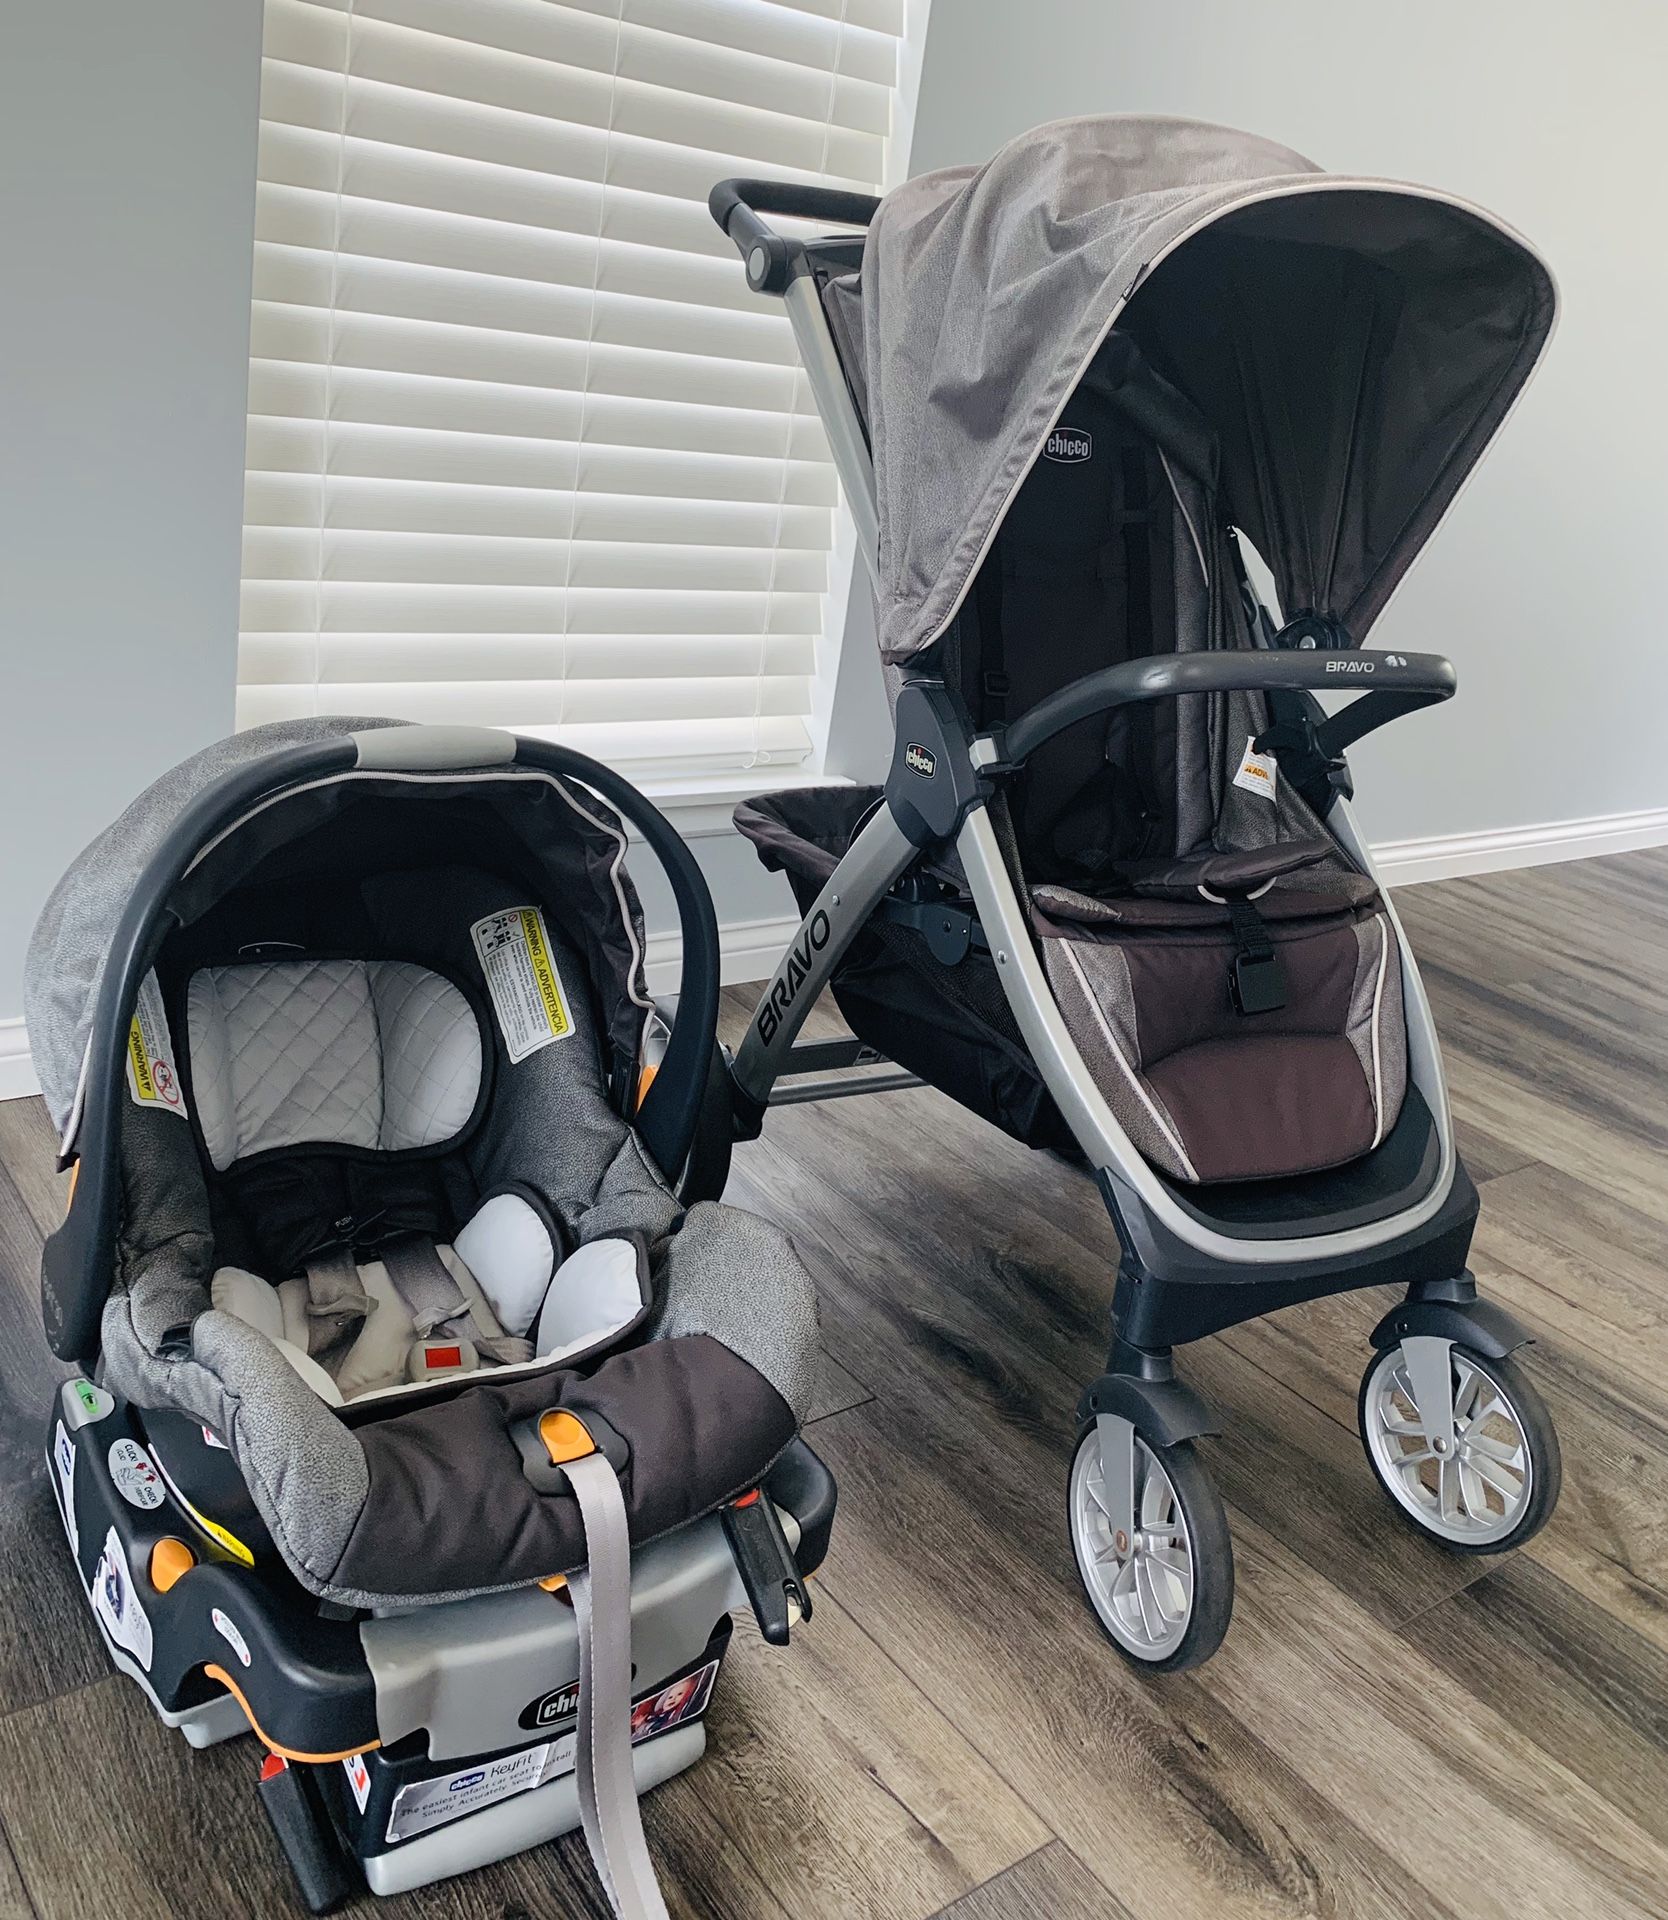 Chicco Bravo trio travel sistem stroller with car seat and base